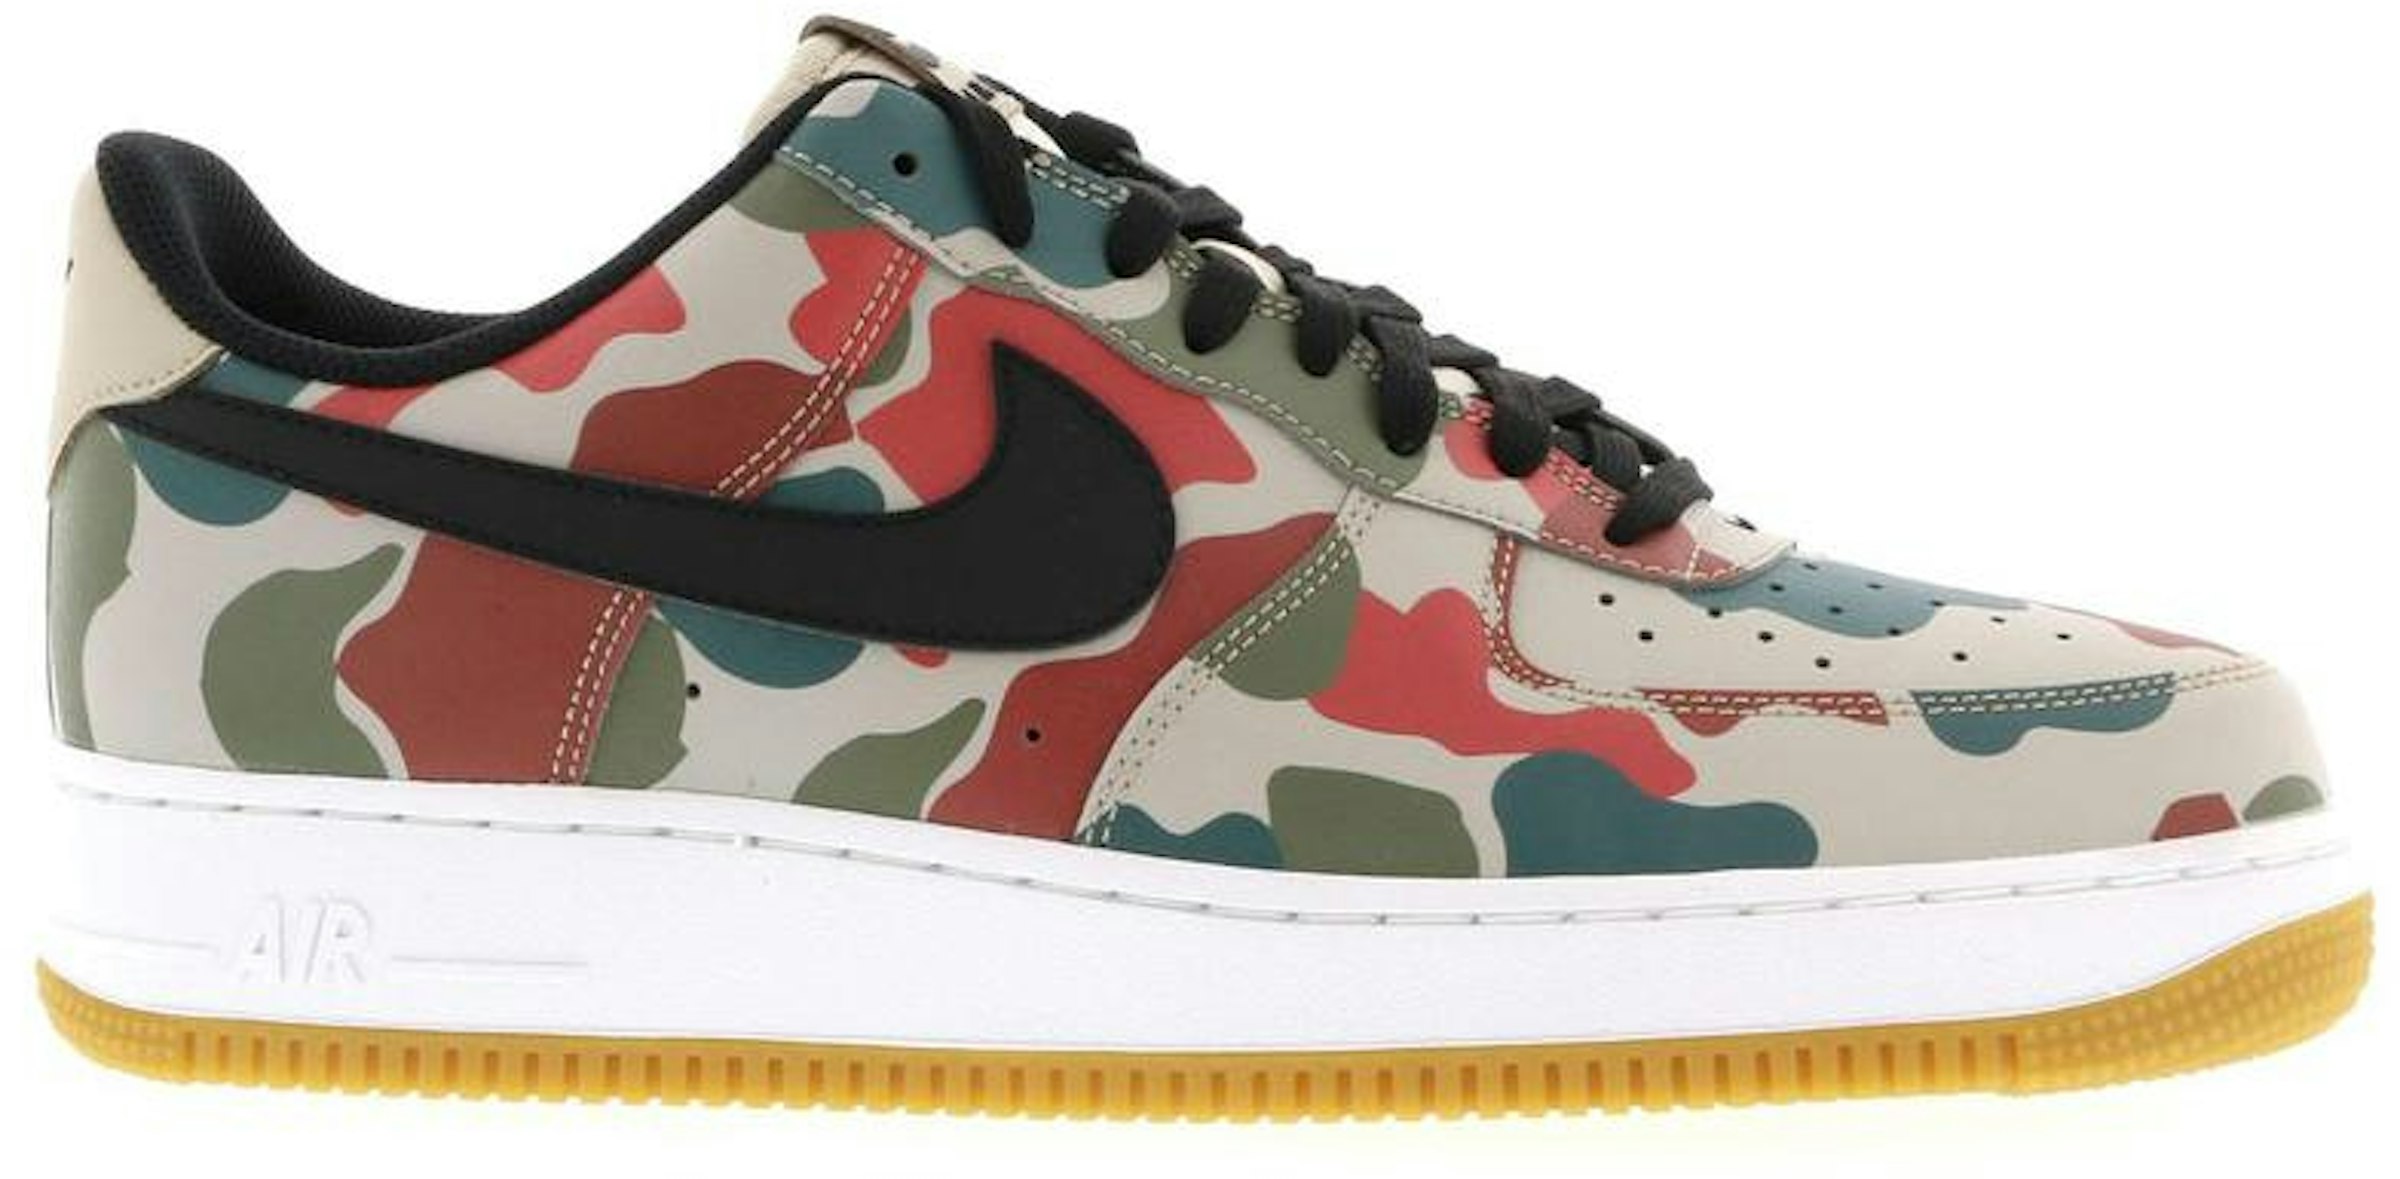 Nike Air Force 1 Low Reflective Duck Camo Men's - US